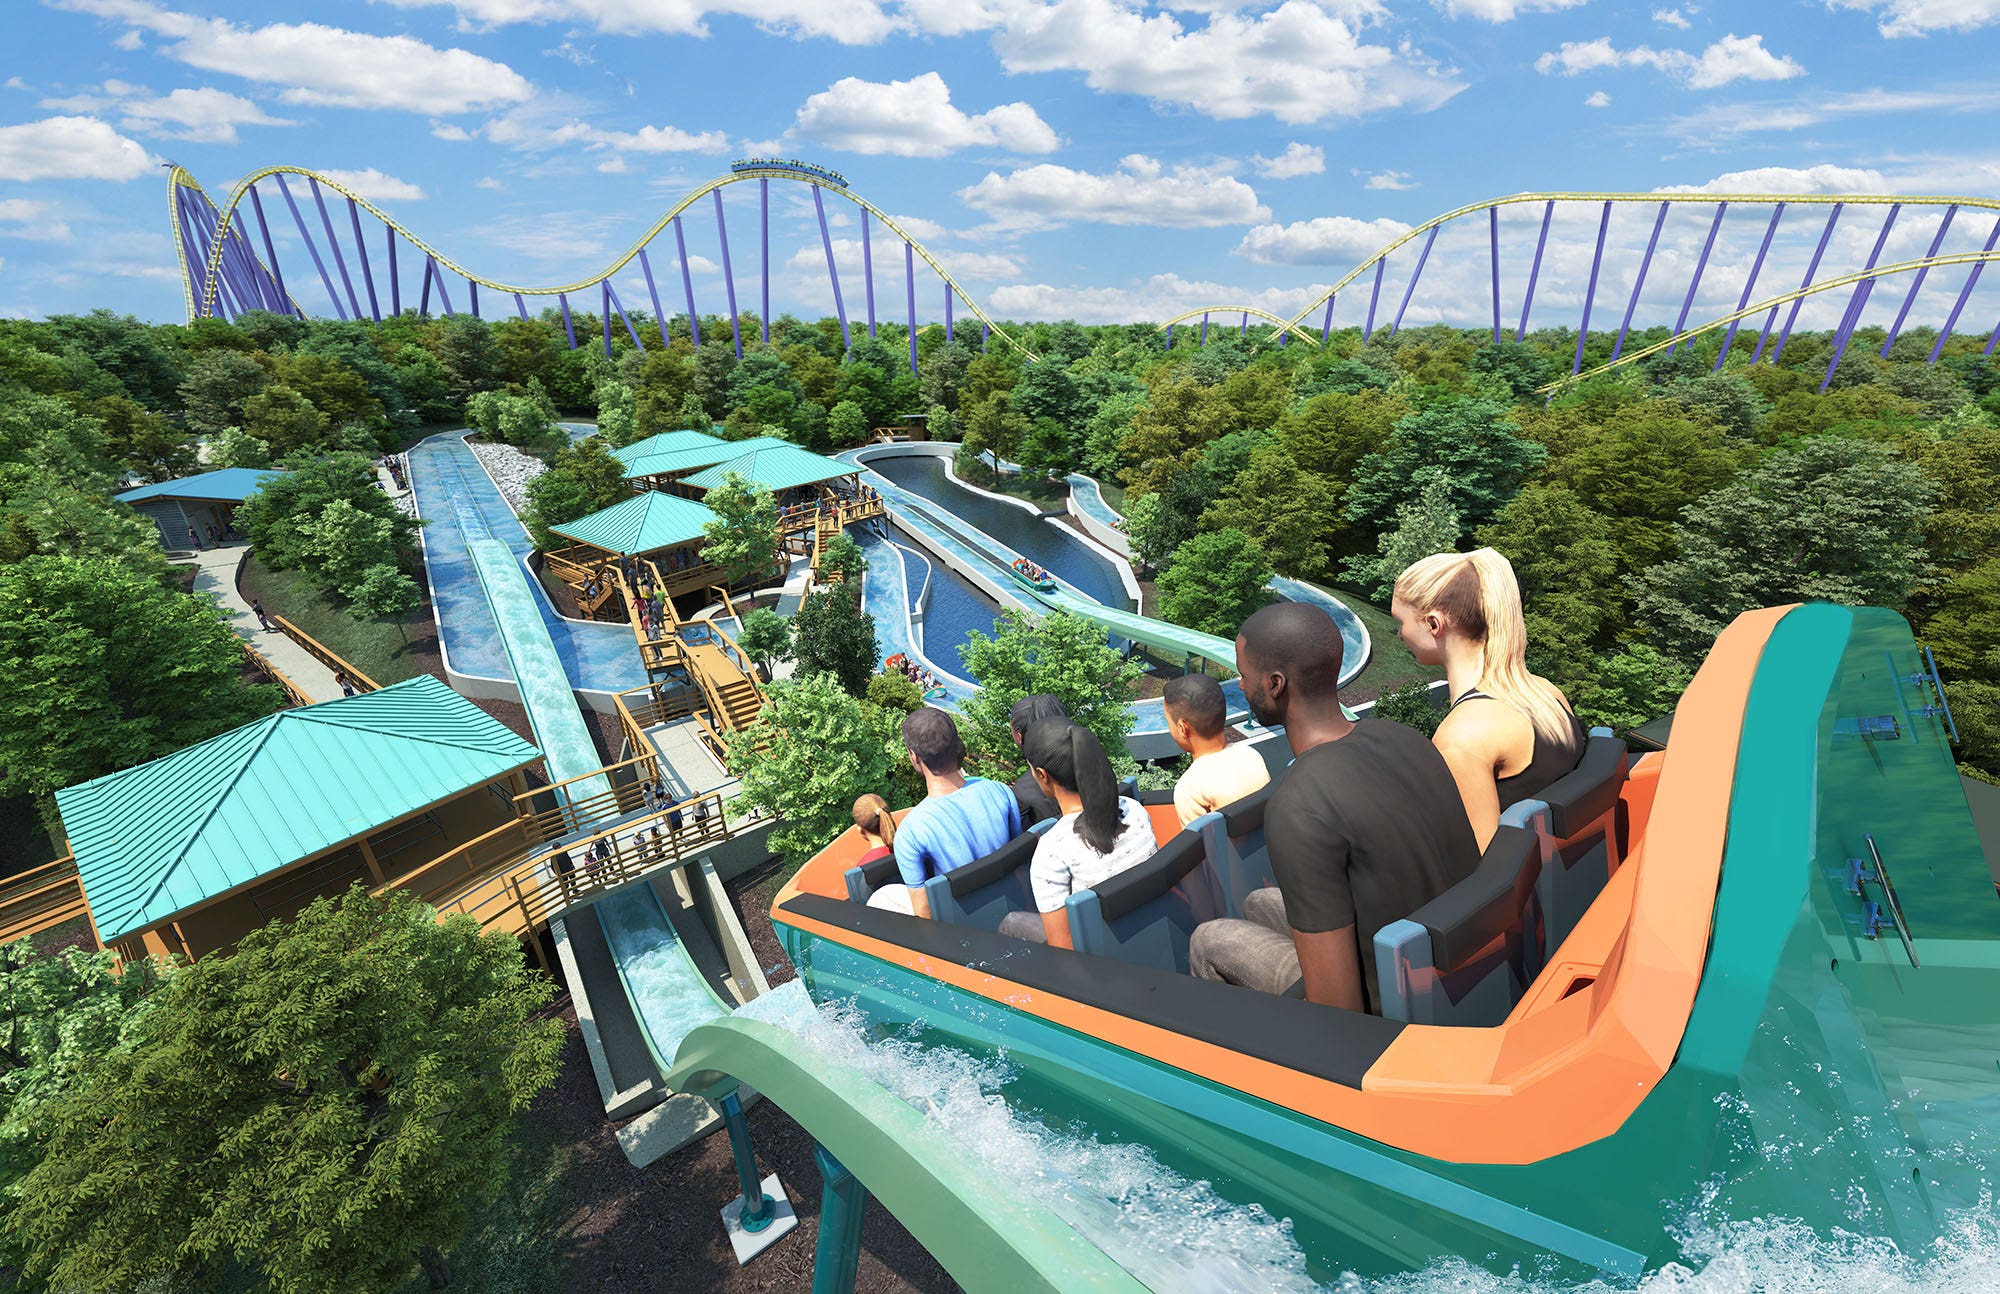 SeaWorld's 3 new roller coaster will break records, mark firsts